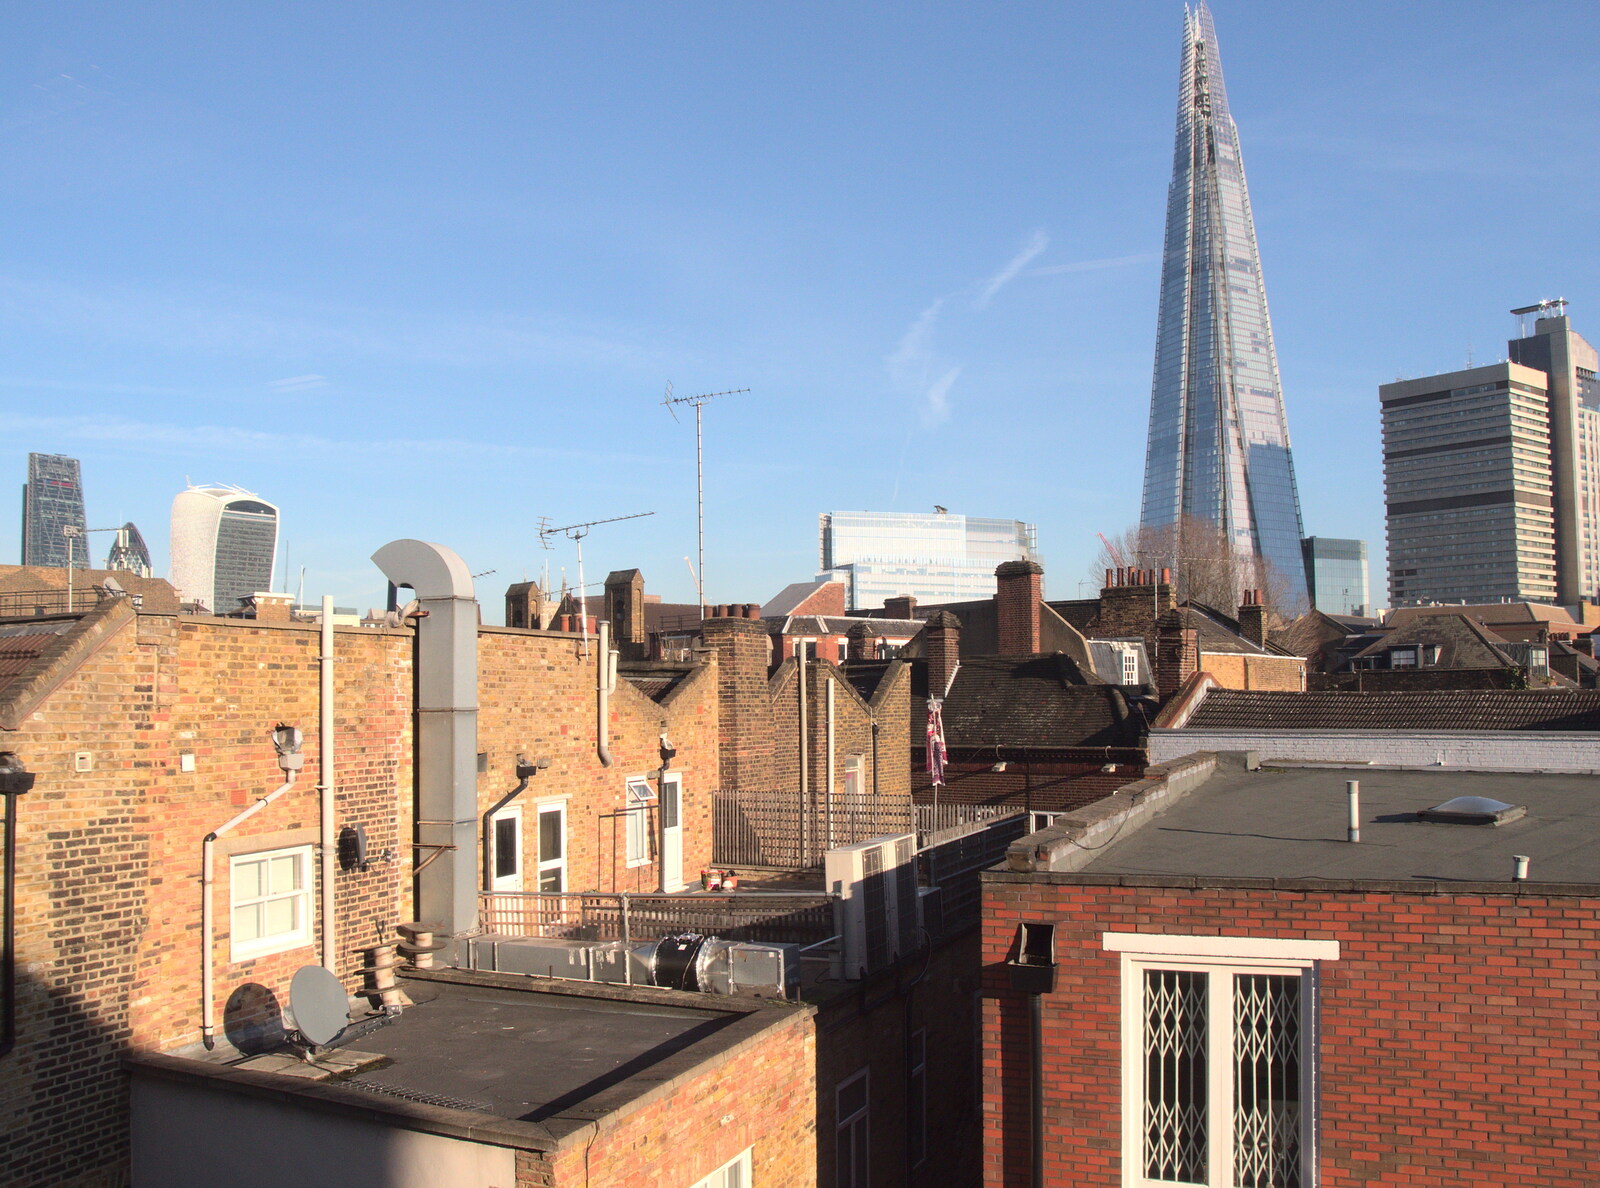 The shard over the houses of Union Street from SwiftKey's Last Days in Southwark and a Taxi Protest, London - 18th January 2017